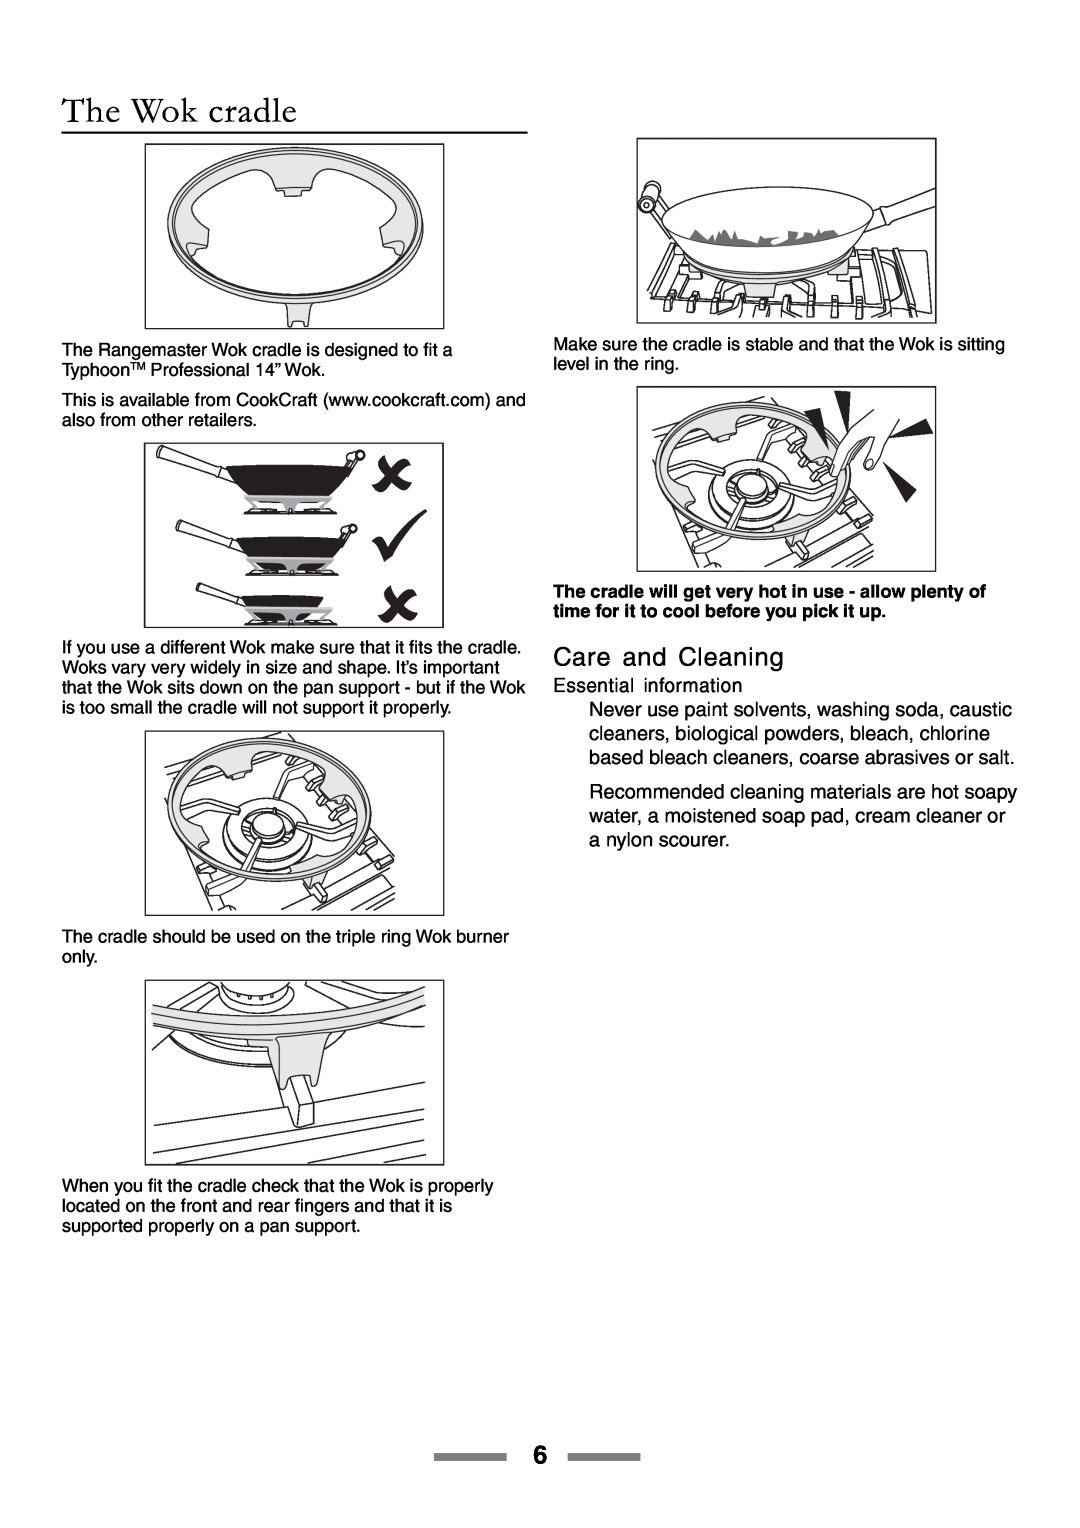 Rangemaster 90 manual The Wok cradle, Care and Cleaning 